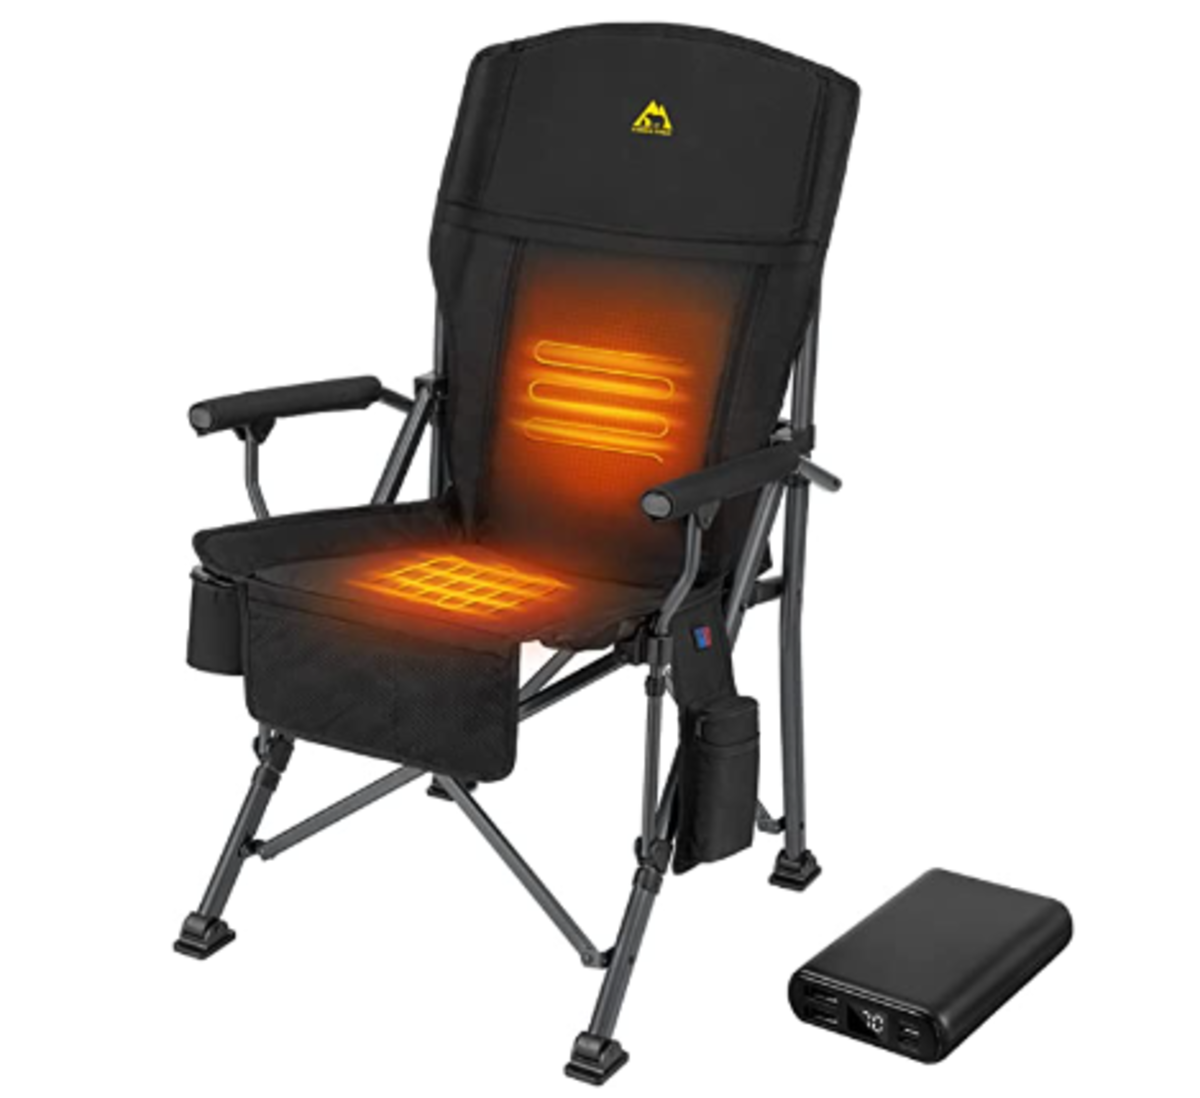 What are the Best Heated Camping Chairs?